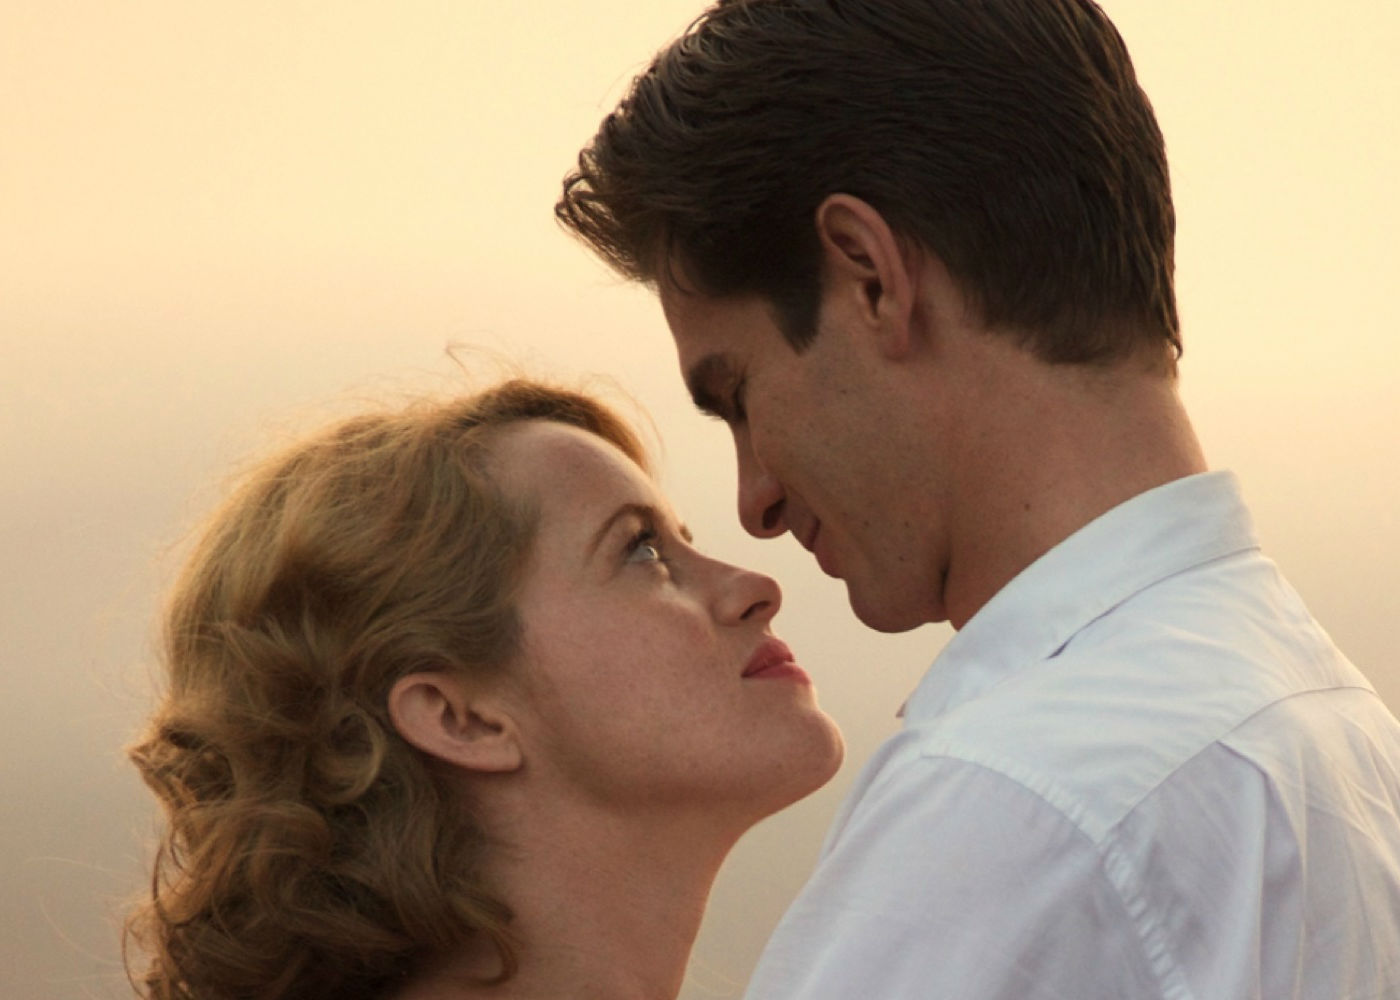 LFF 2017: ‘Breathe’ Showcases Garfield and Foy in Charming Biopic